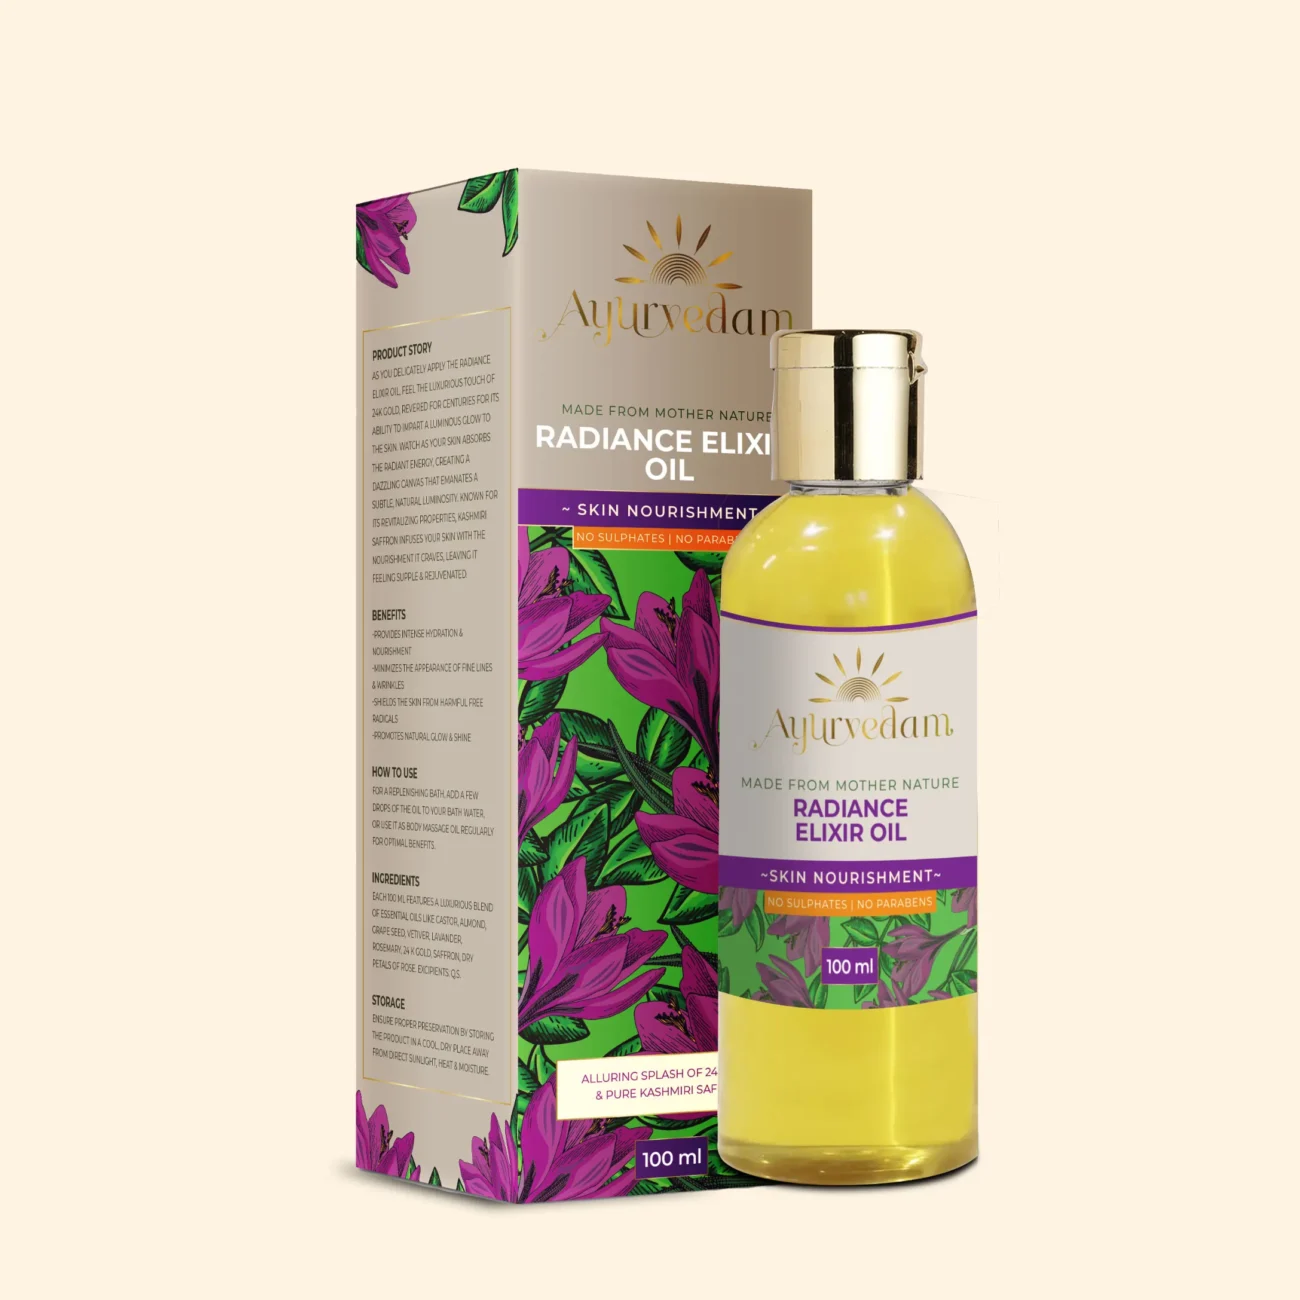 Radiance Elixir Oil, an ayurvedic body massage oil along with its package by Ayurvedam